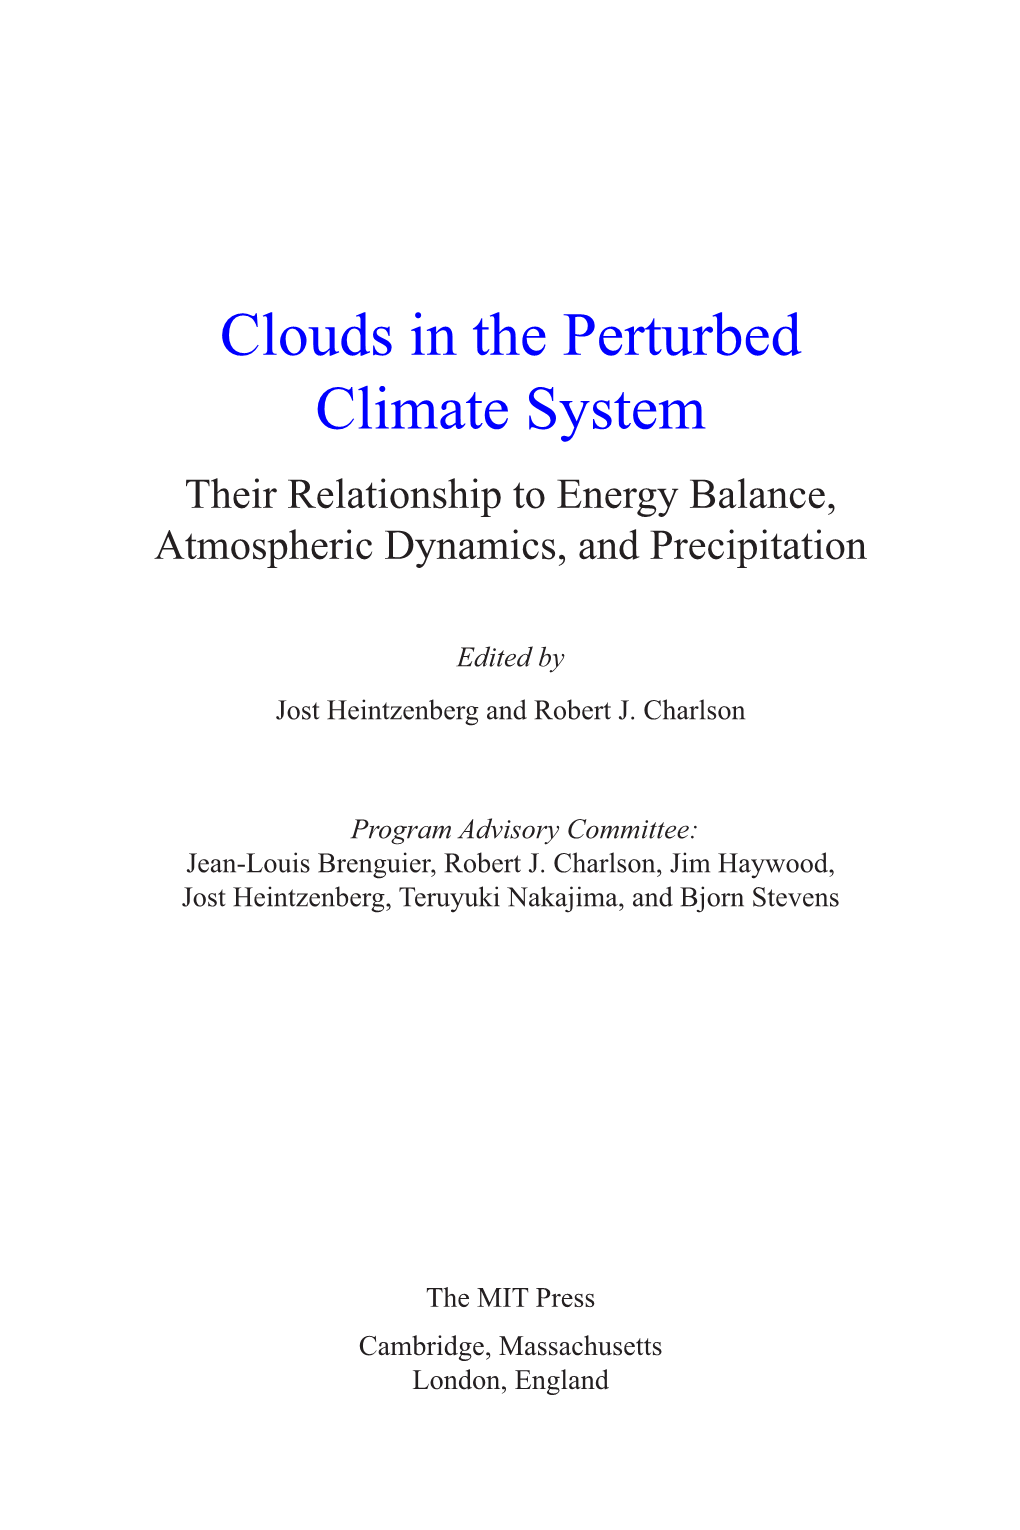 Clouds in the Perturbed Climate System Their Relationship to Energy Balance, Atmospheric Dynamics, and Precipitation